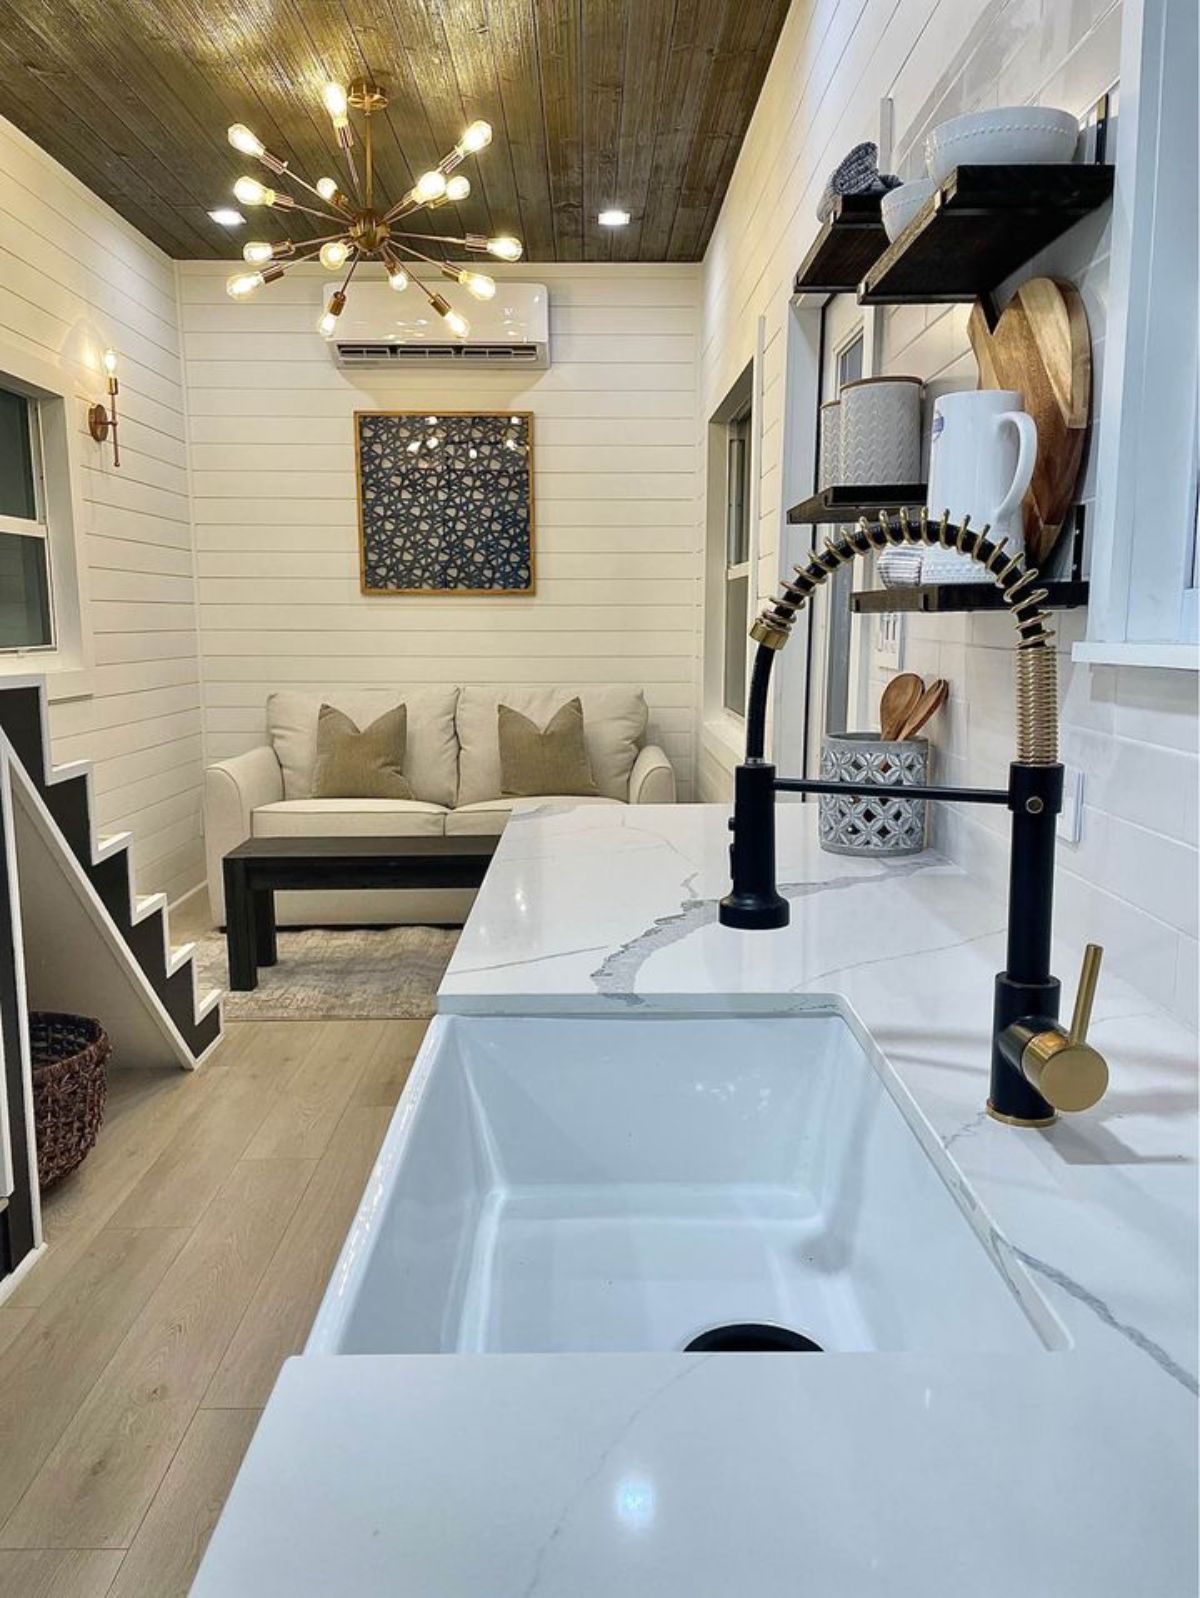 black faucet over white sink in white marble counter of tiny house kitchen